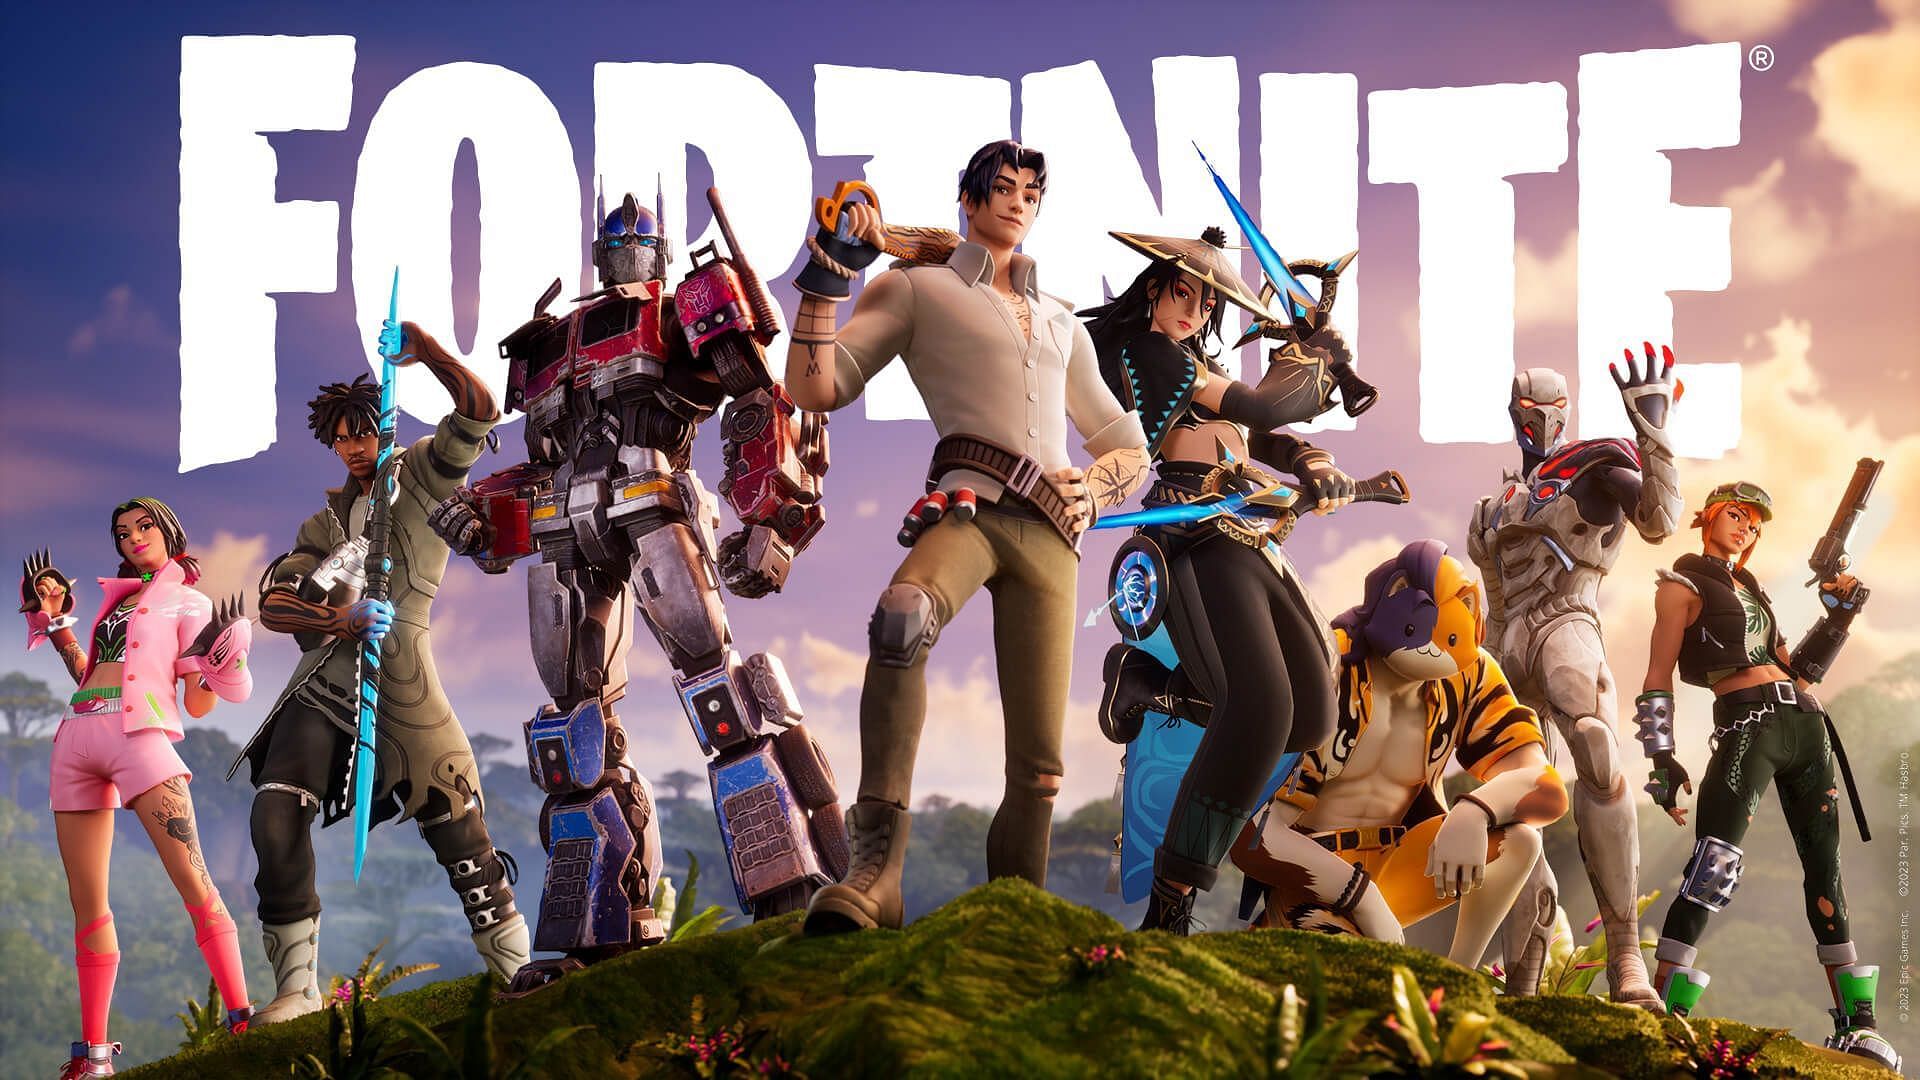 A live event could be coming to Fortnite (Image via Epic Games)